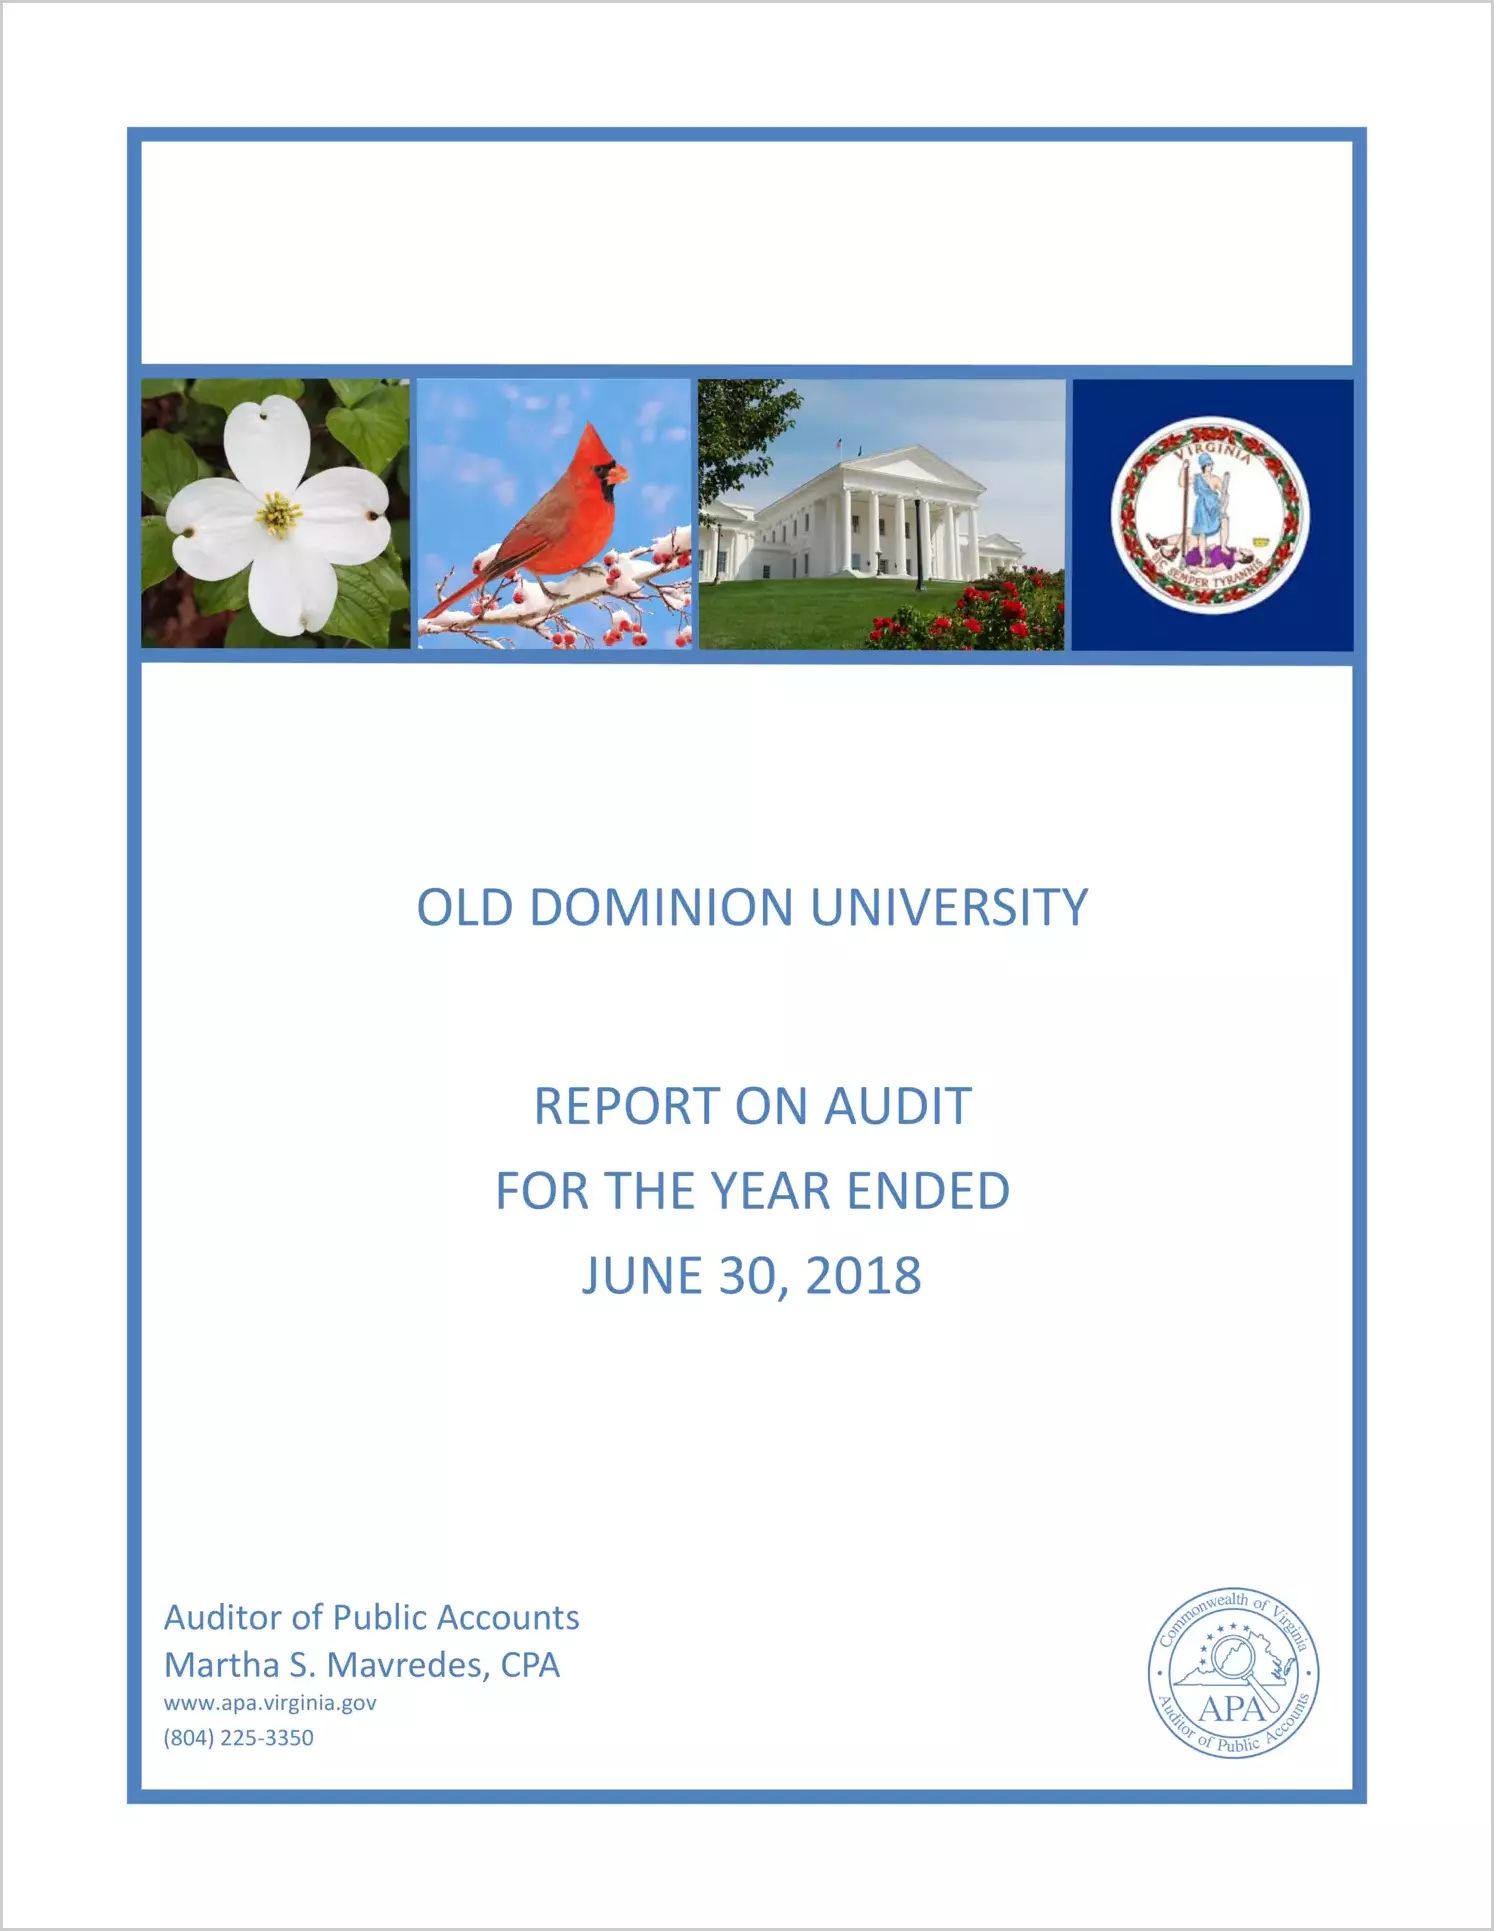 Old Dominion University for the year ended June 30, 2018